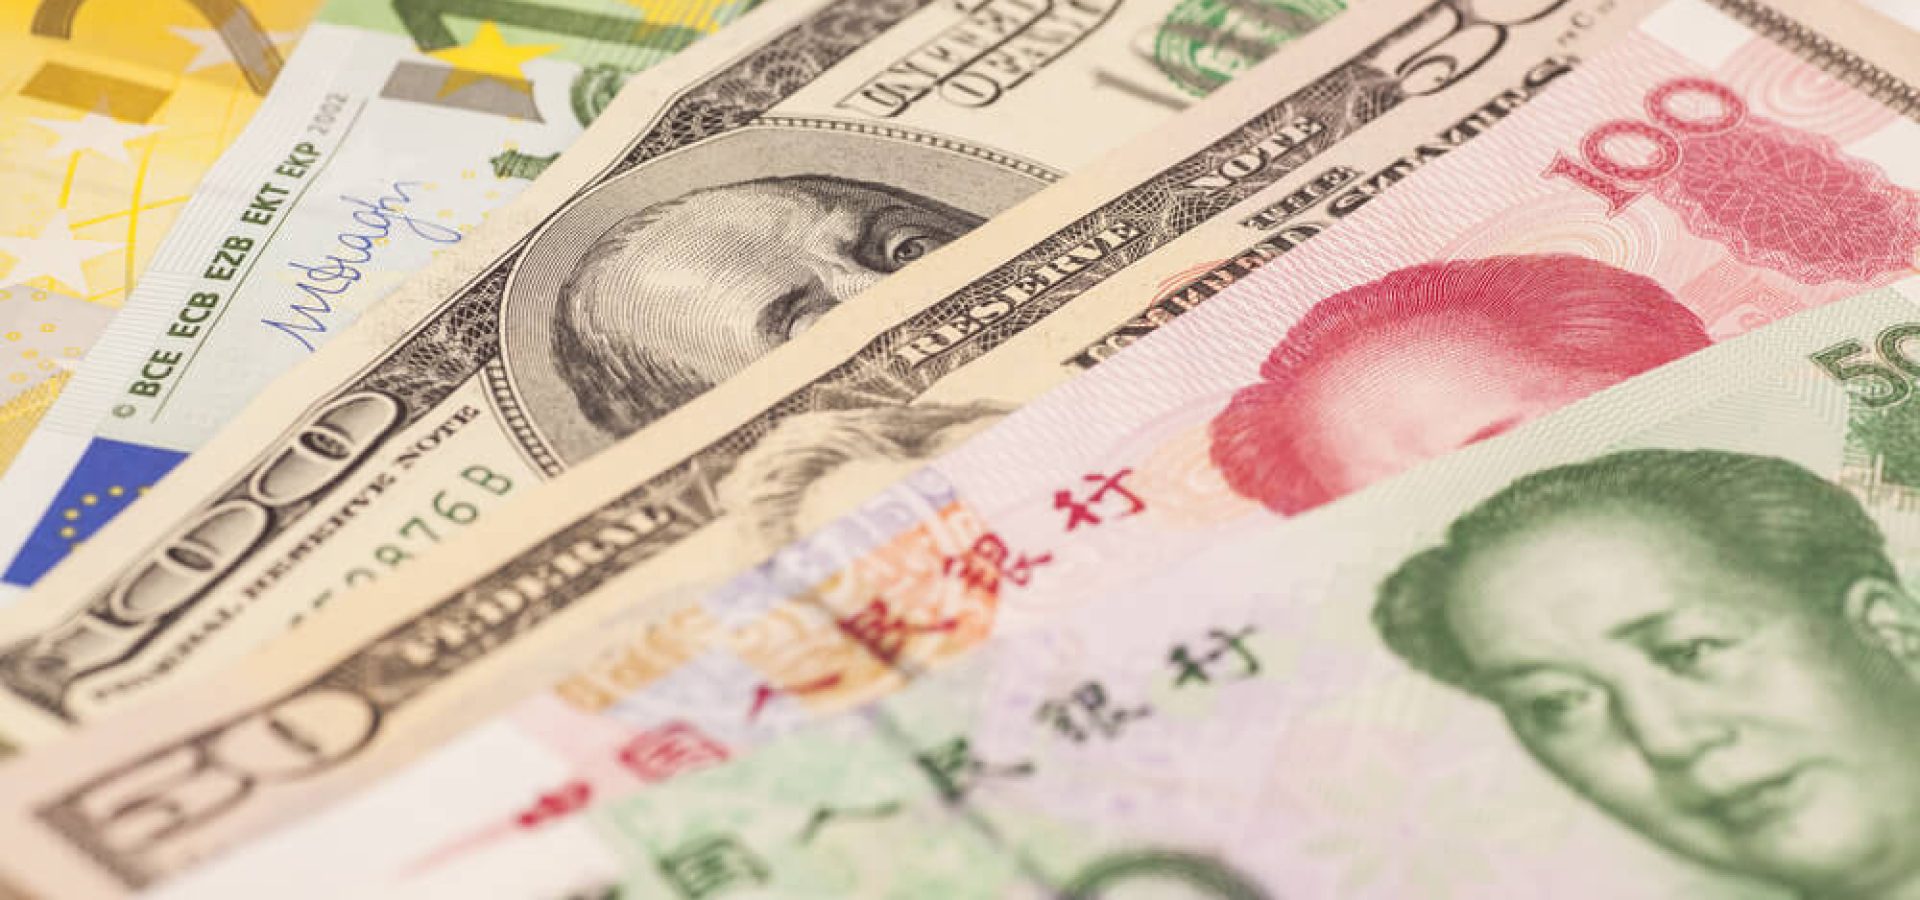 Wibest – Currency: Dollar, Yuan and Euro notes.